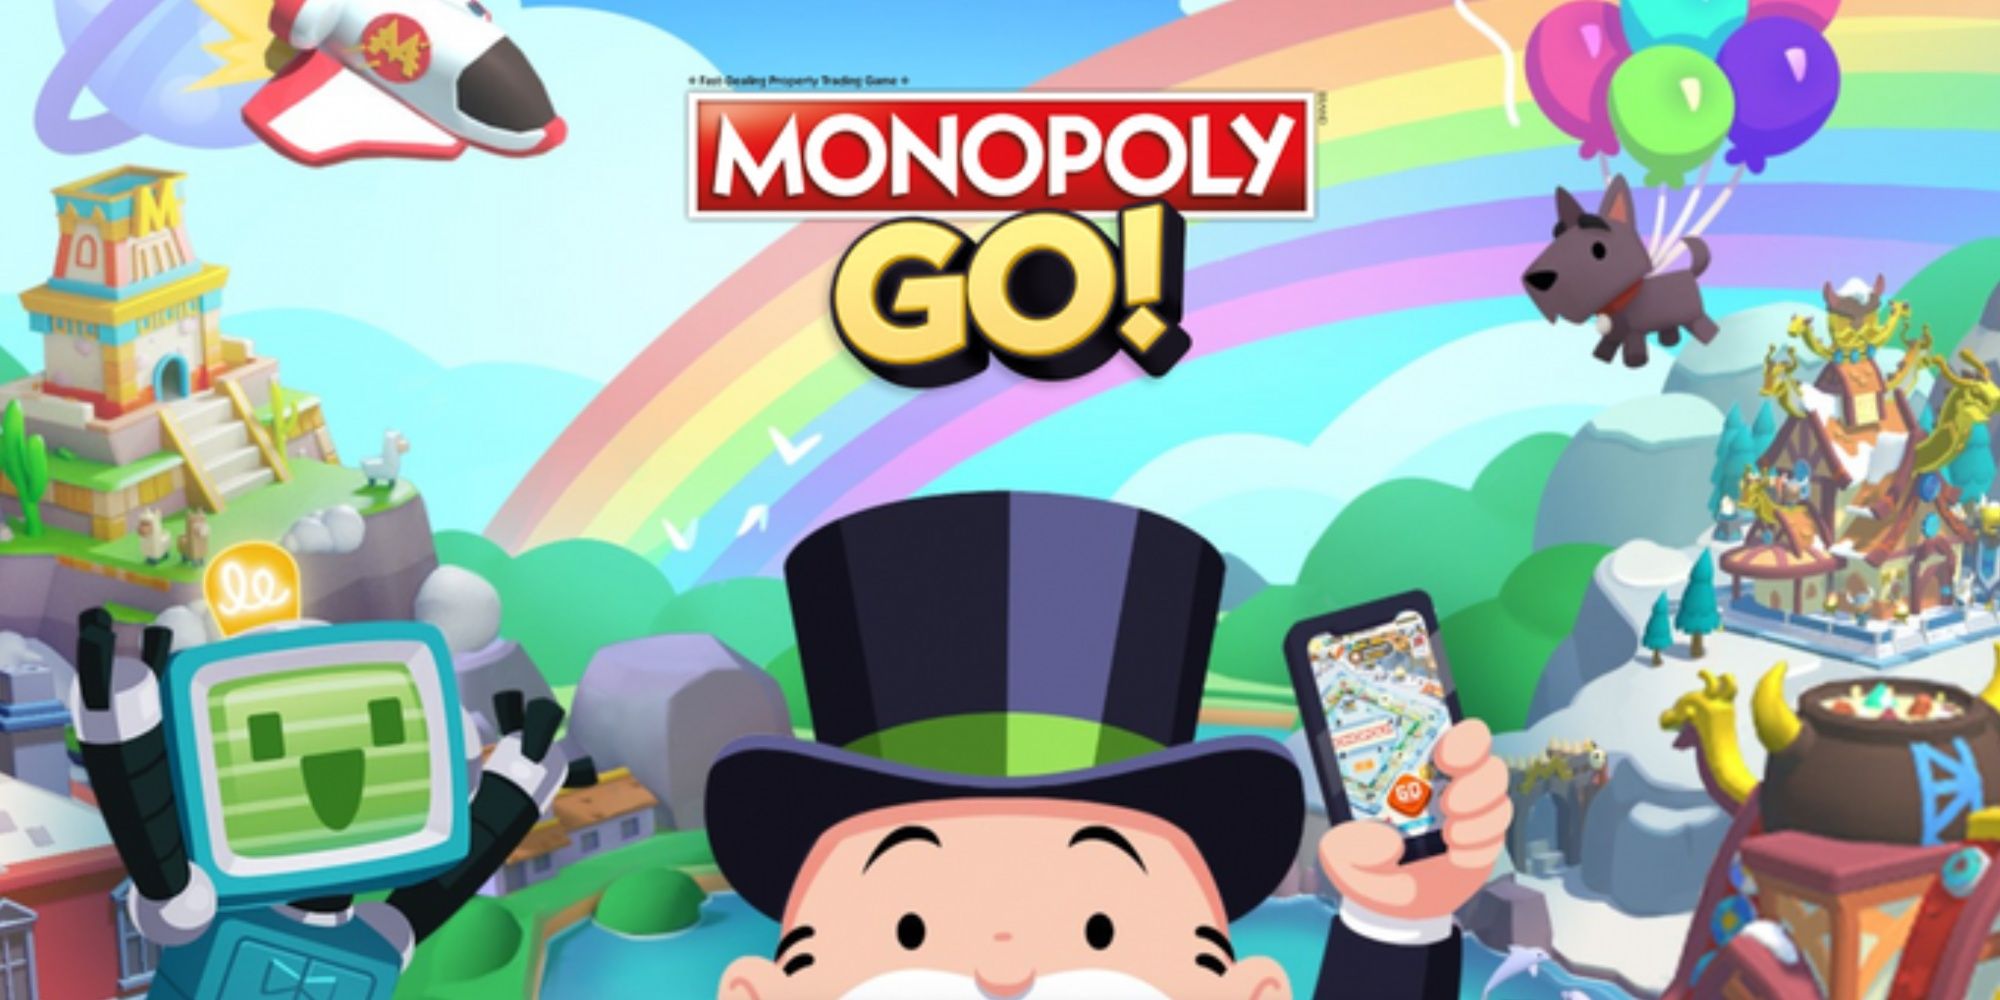 Promotional banner for the game Monopoly Go!